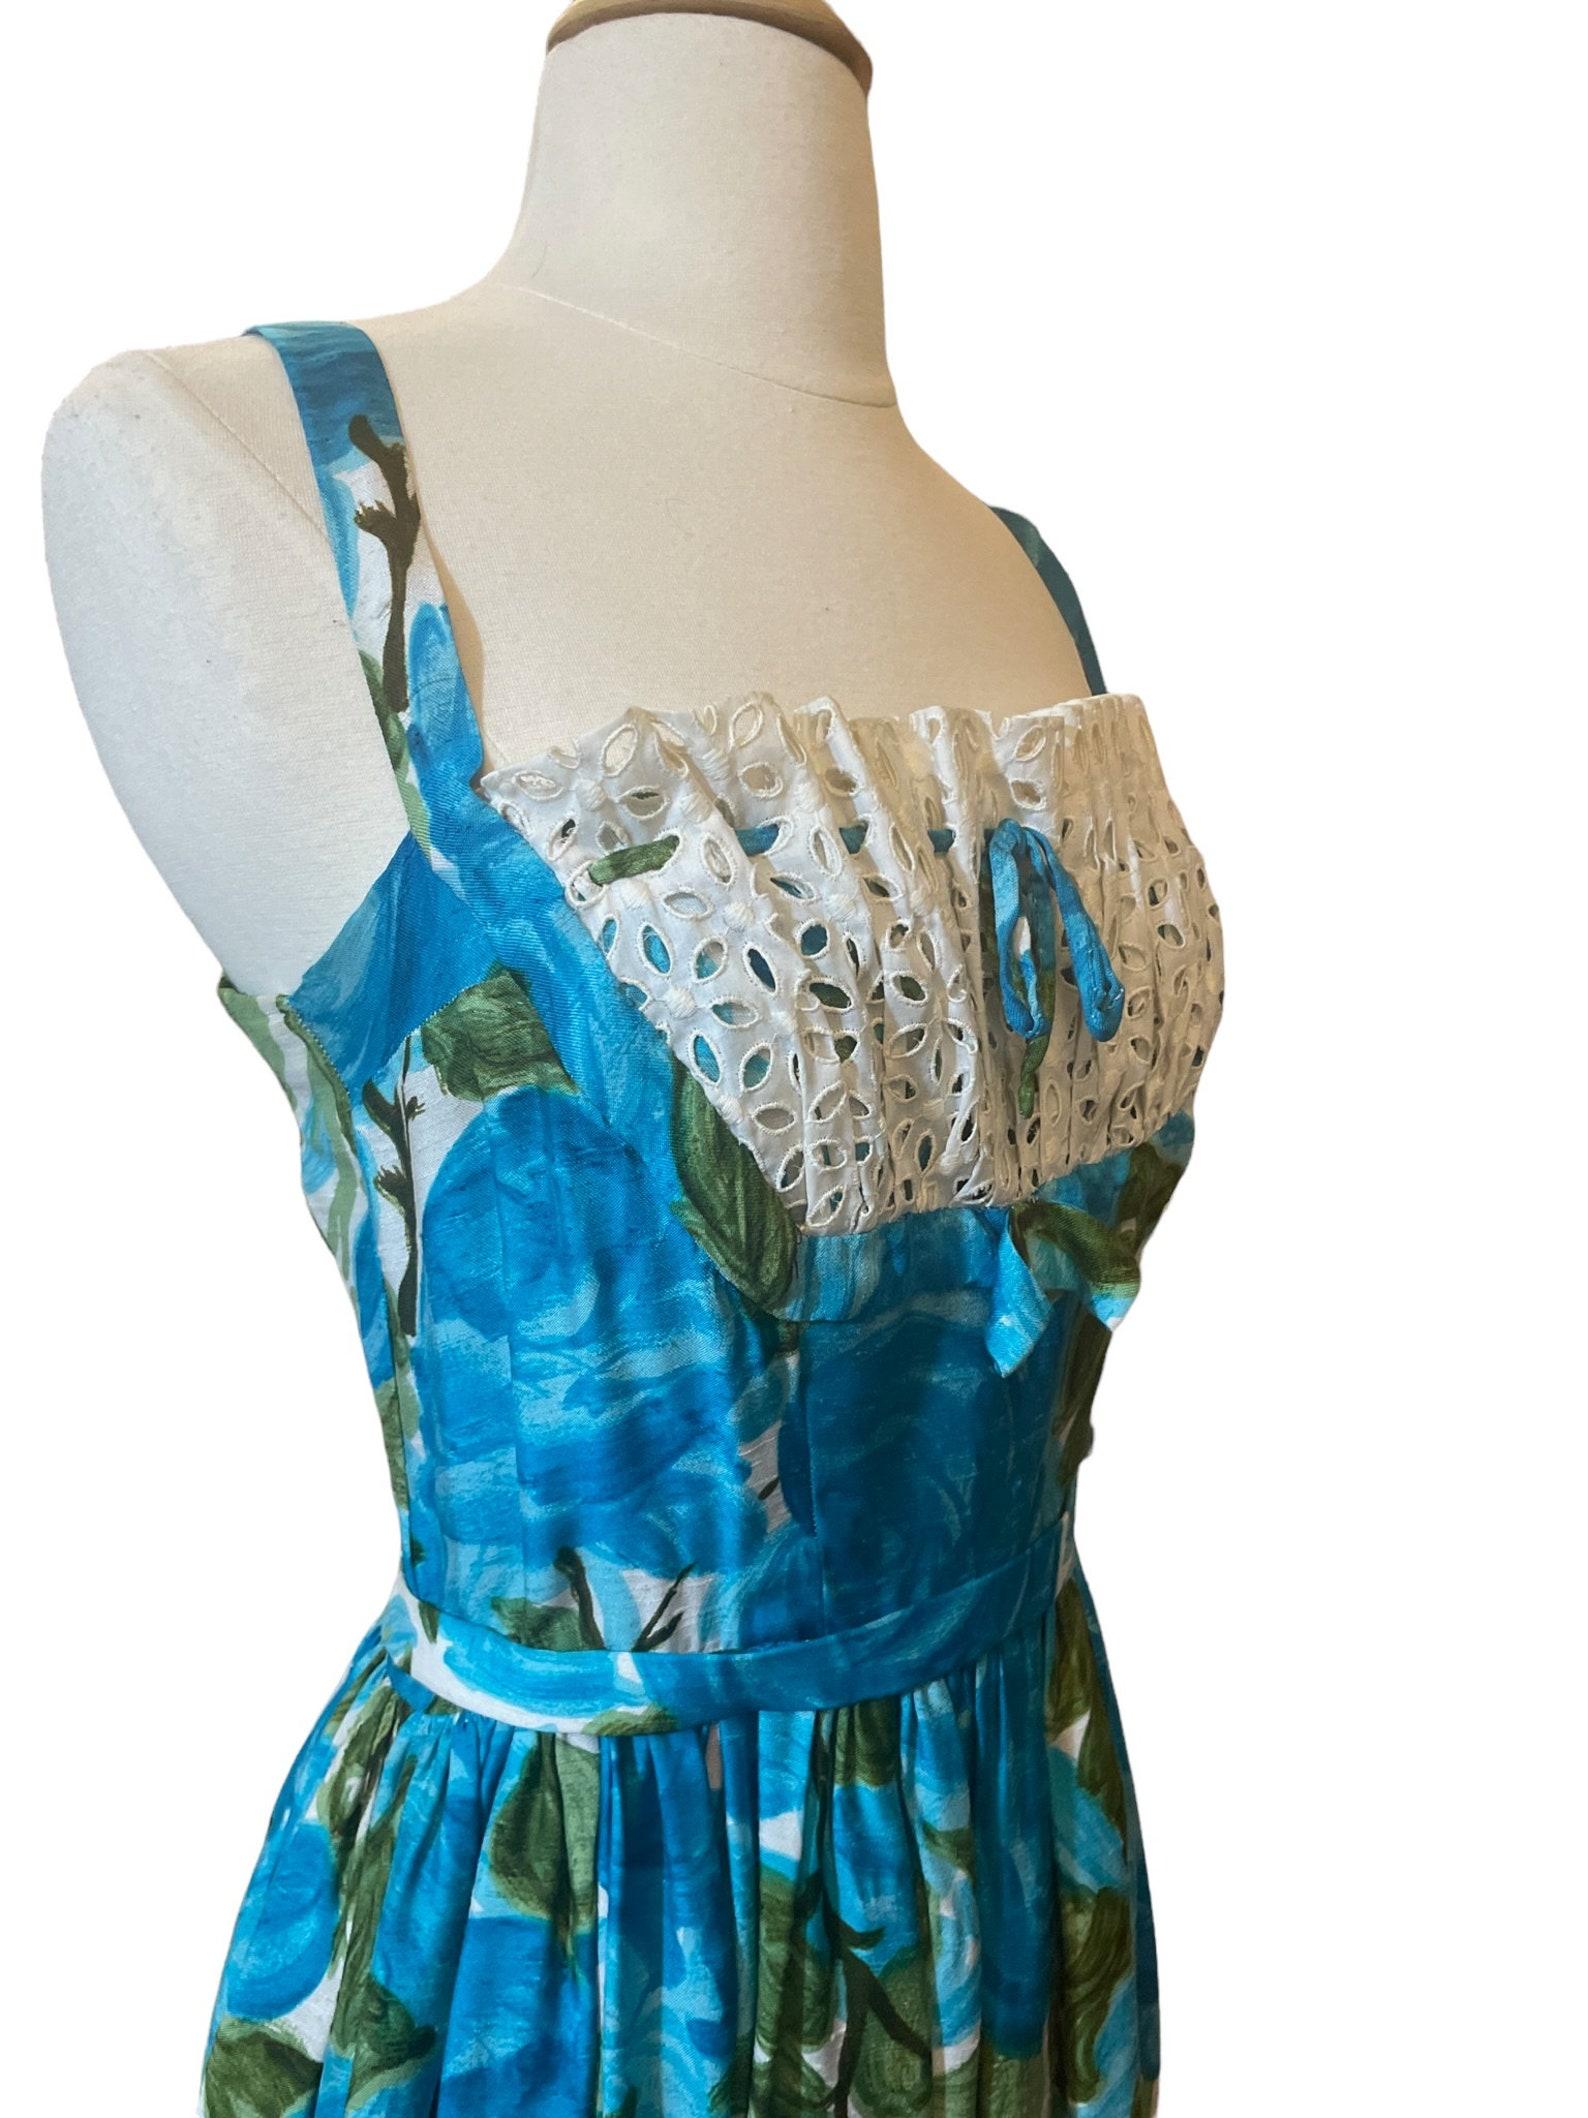 Blue and Green Watercolor Floral Sun Dress, Circa 1950s For Sale 3